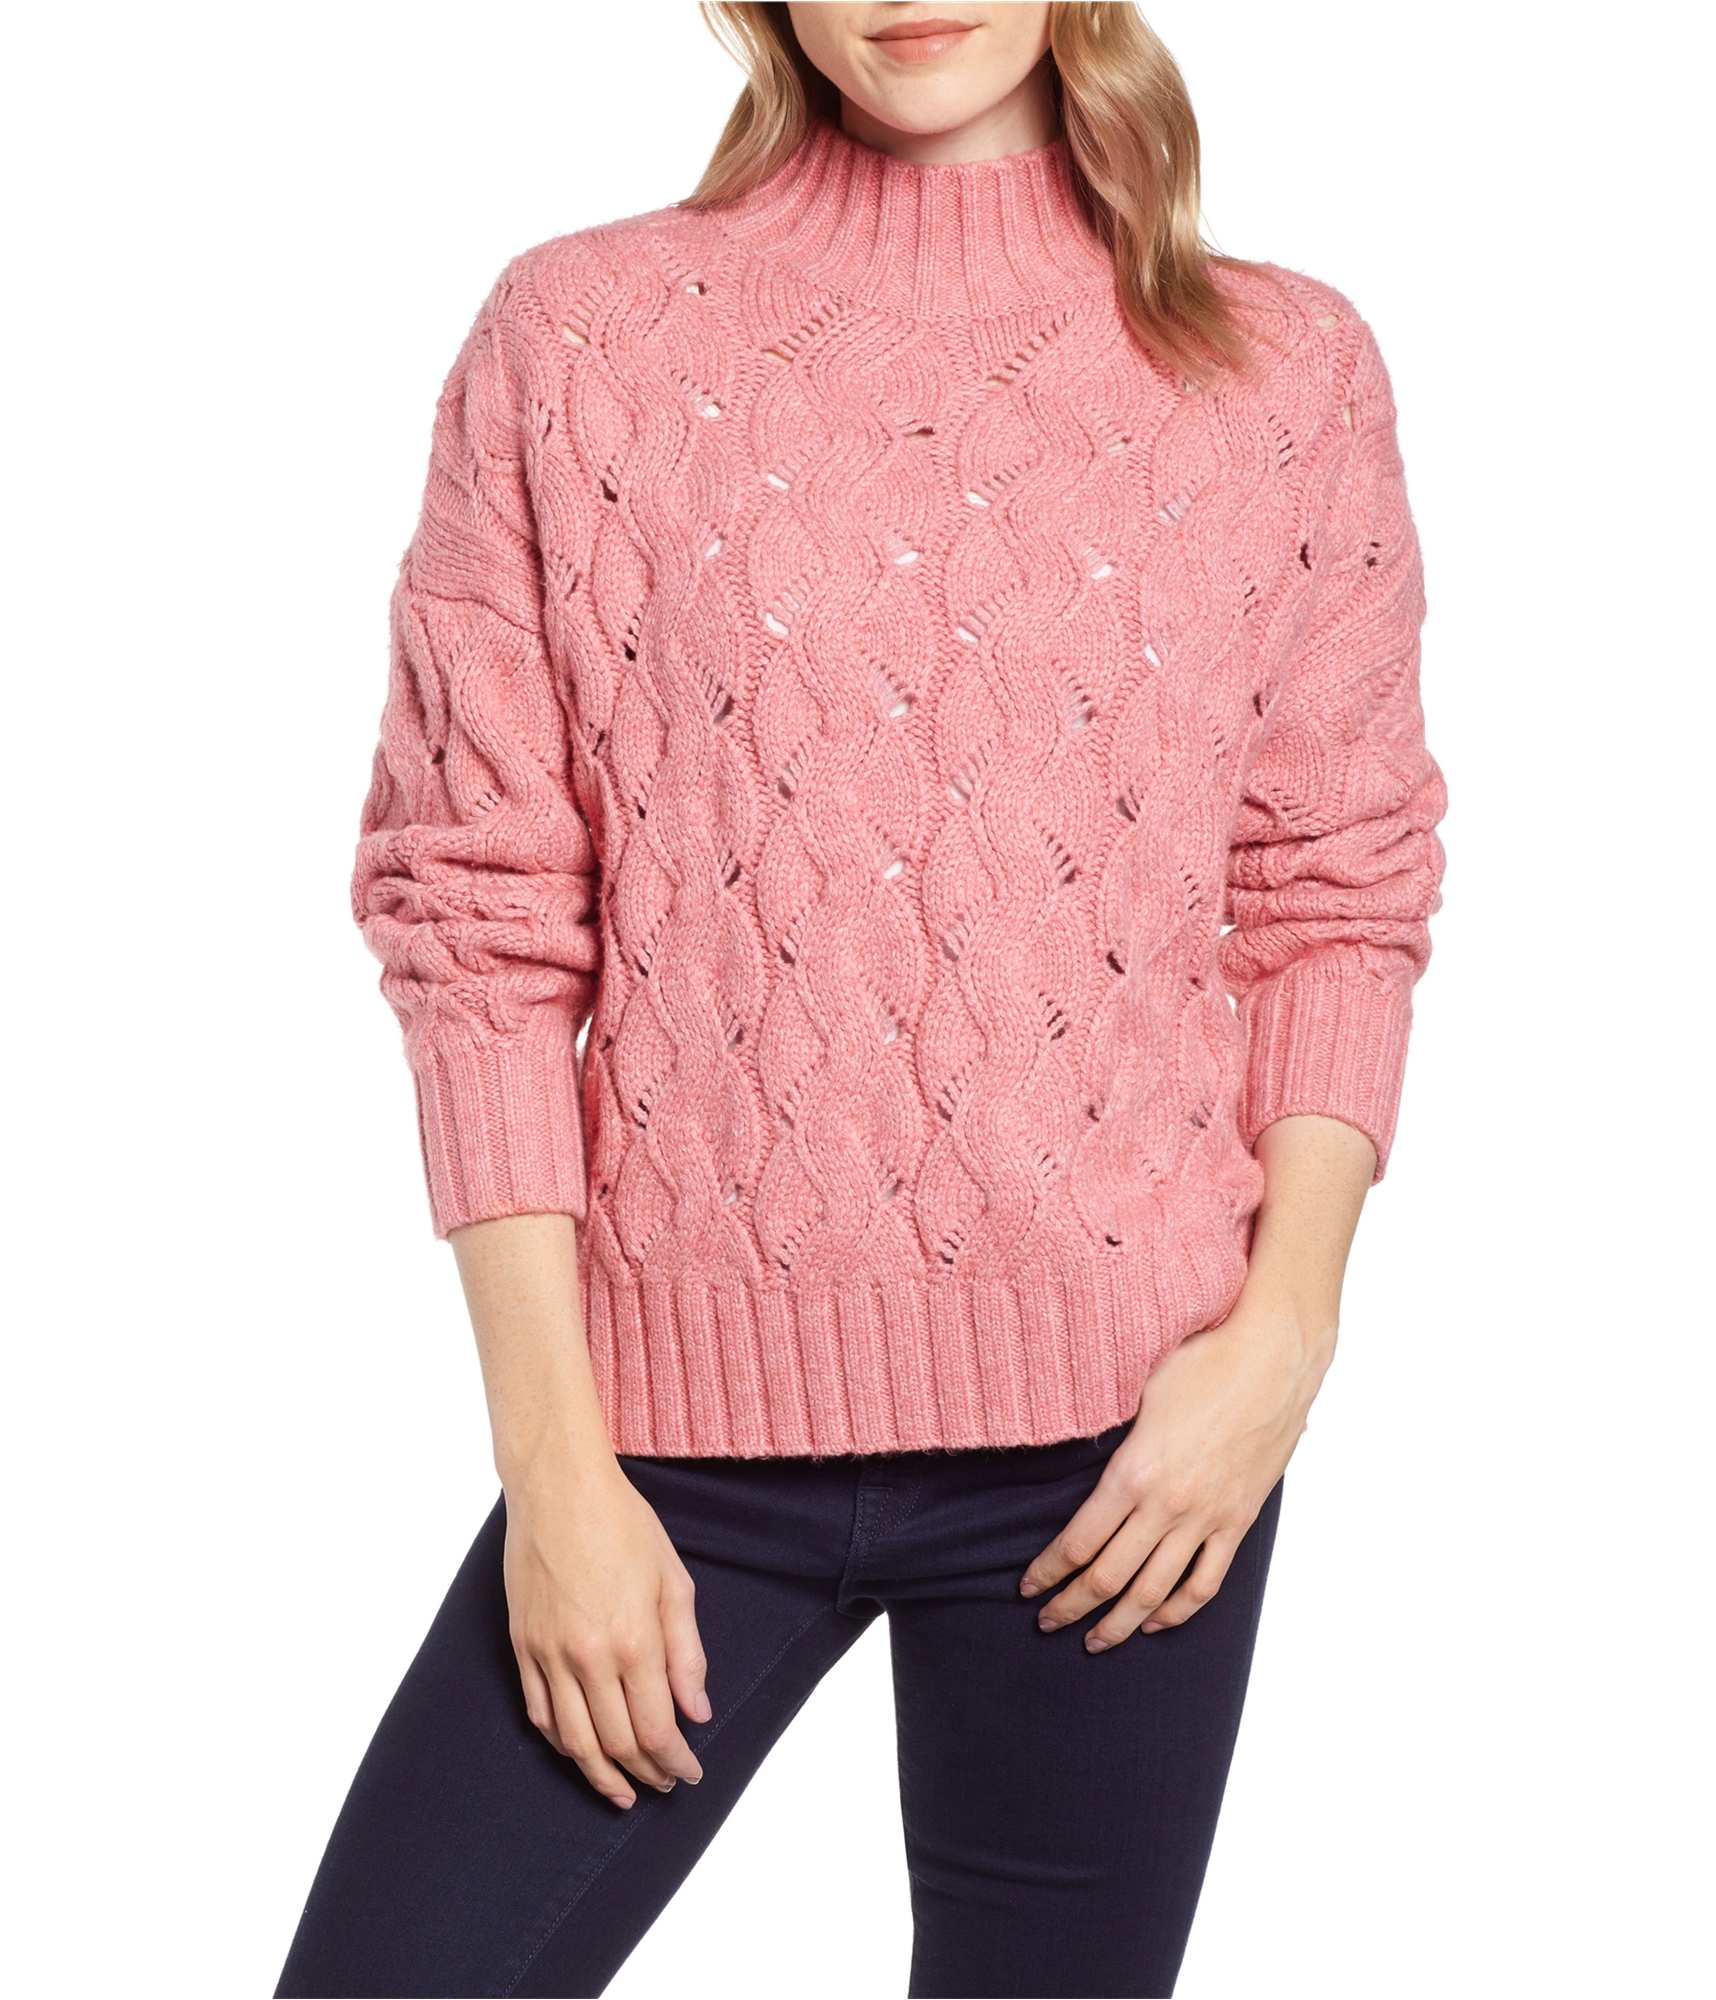 Woman-wearing-pullover-sweater-blouse